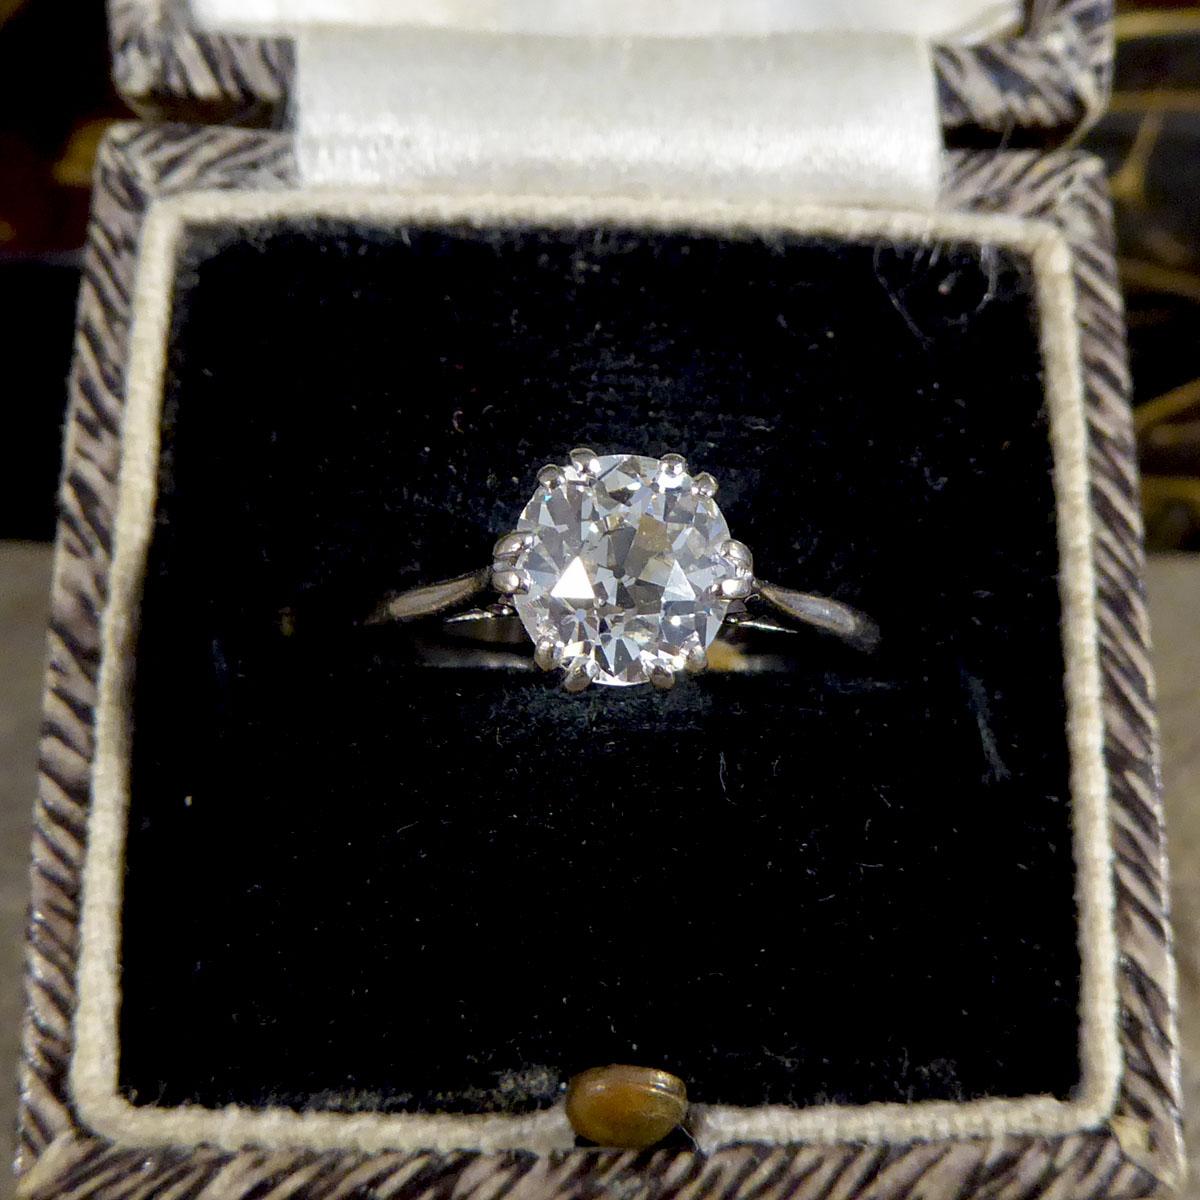 Edwardian 1.20ct Old Cushion Cut Diamond Solitaire Engagement Ring in 18ct White 3